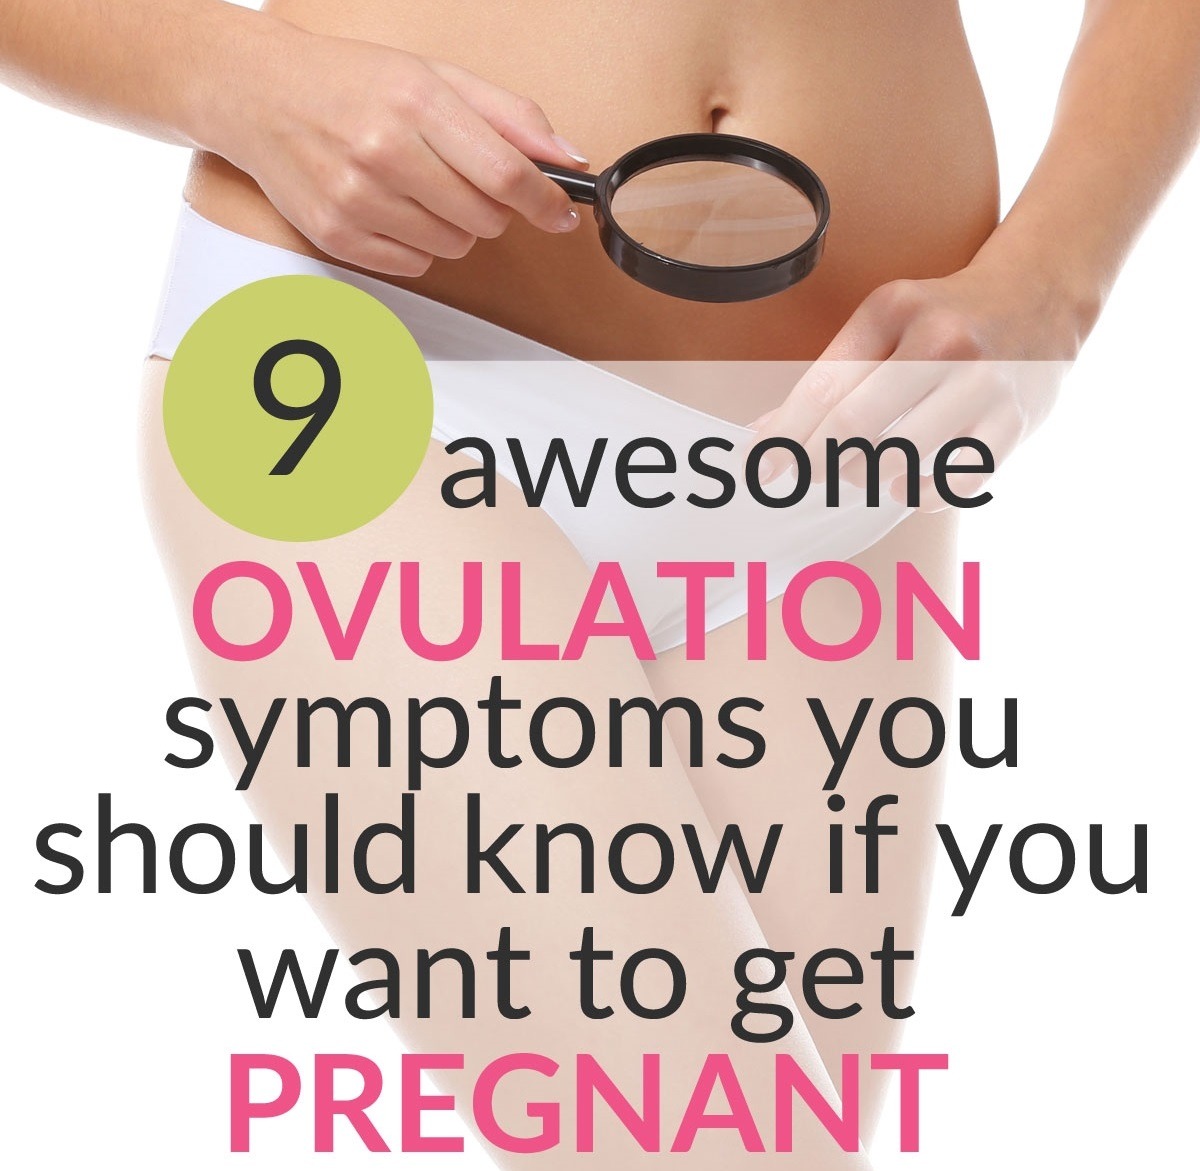 9 Awesome Ovulation Symptoms You Should Know If Your Want ...